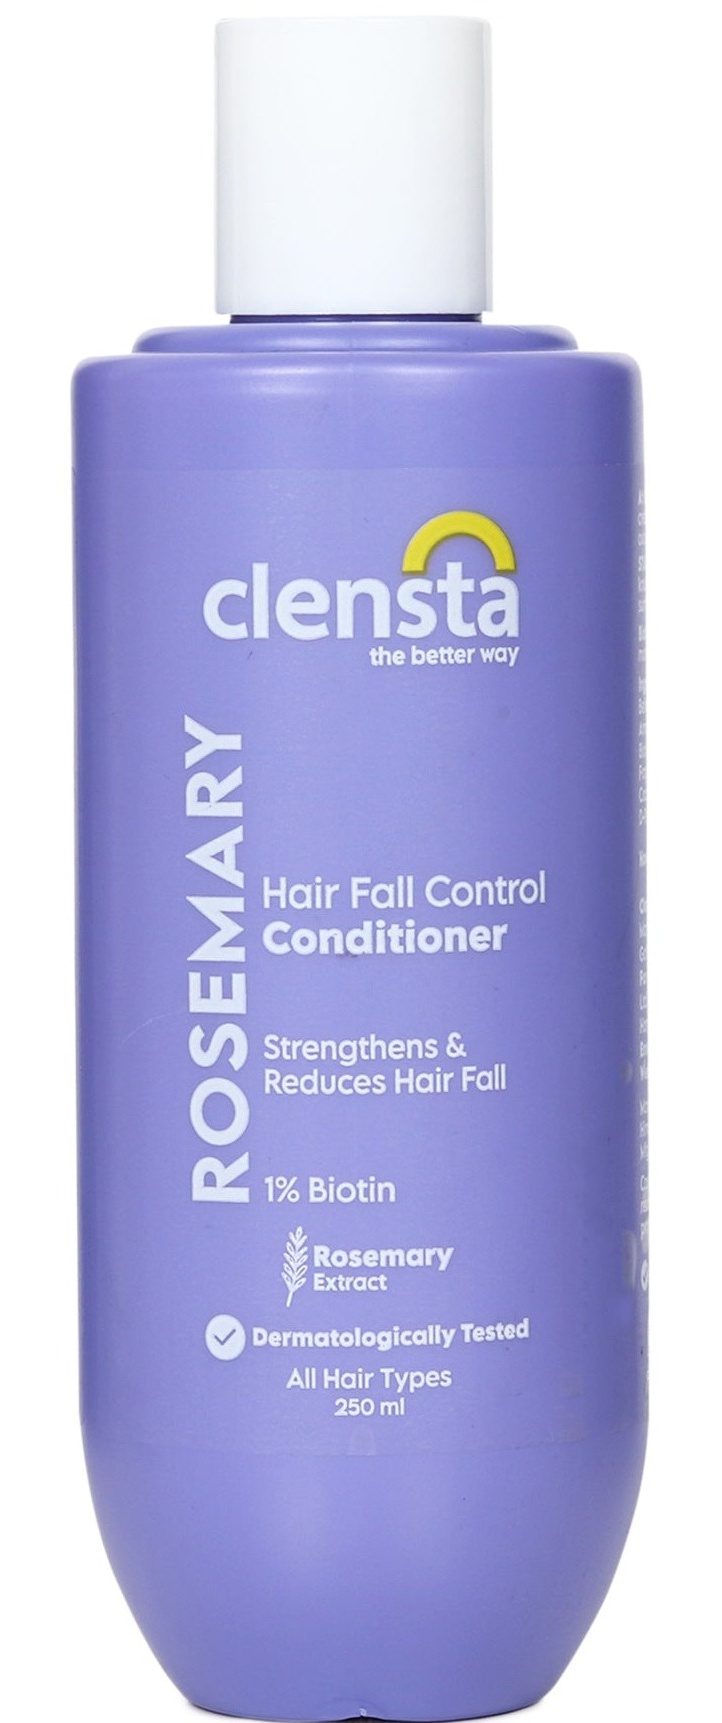 Clensta Rosemary Hair Fall Control Conditioner With Rosemary & Biotin For Reducing Hair Loss, Breakage & Daily Use